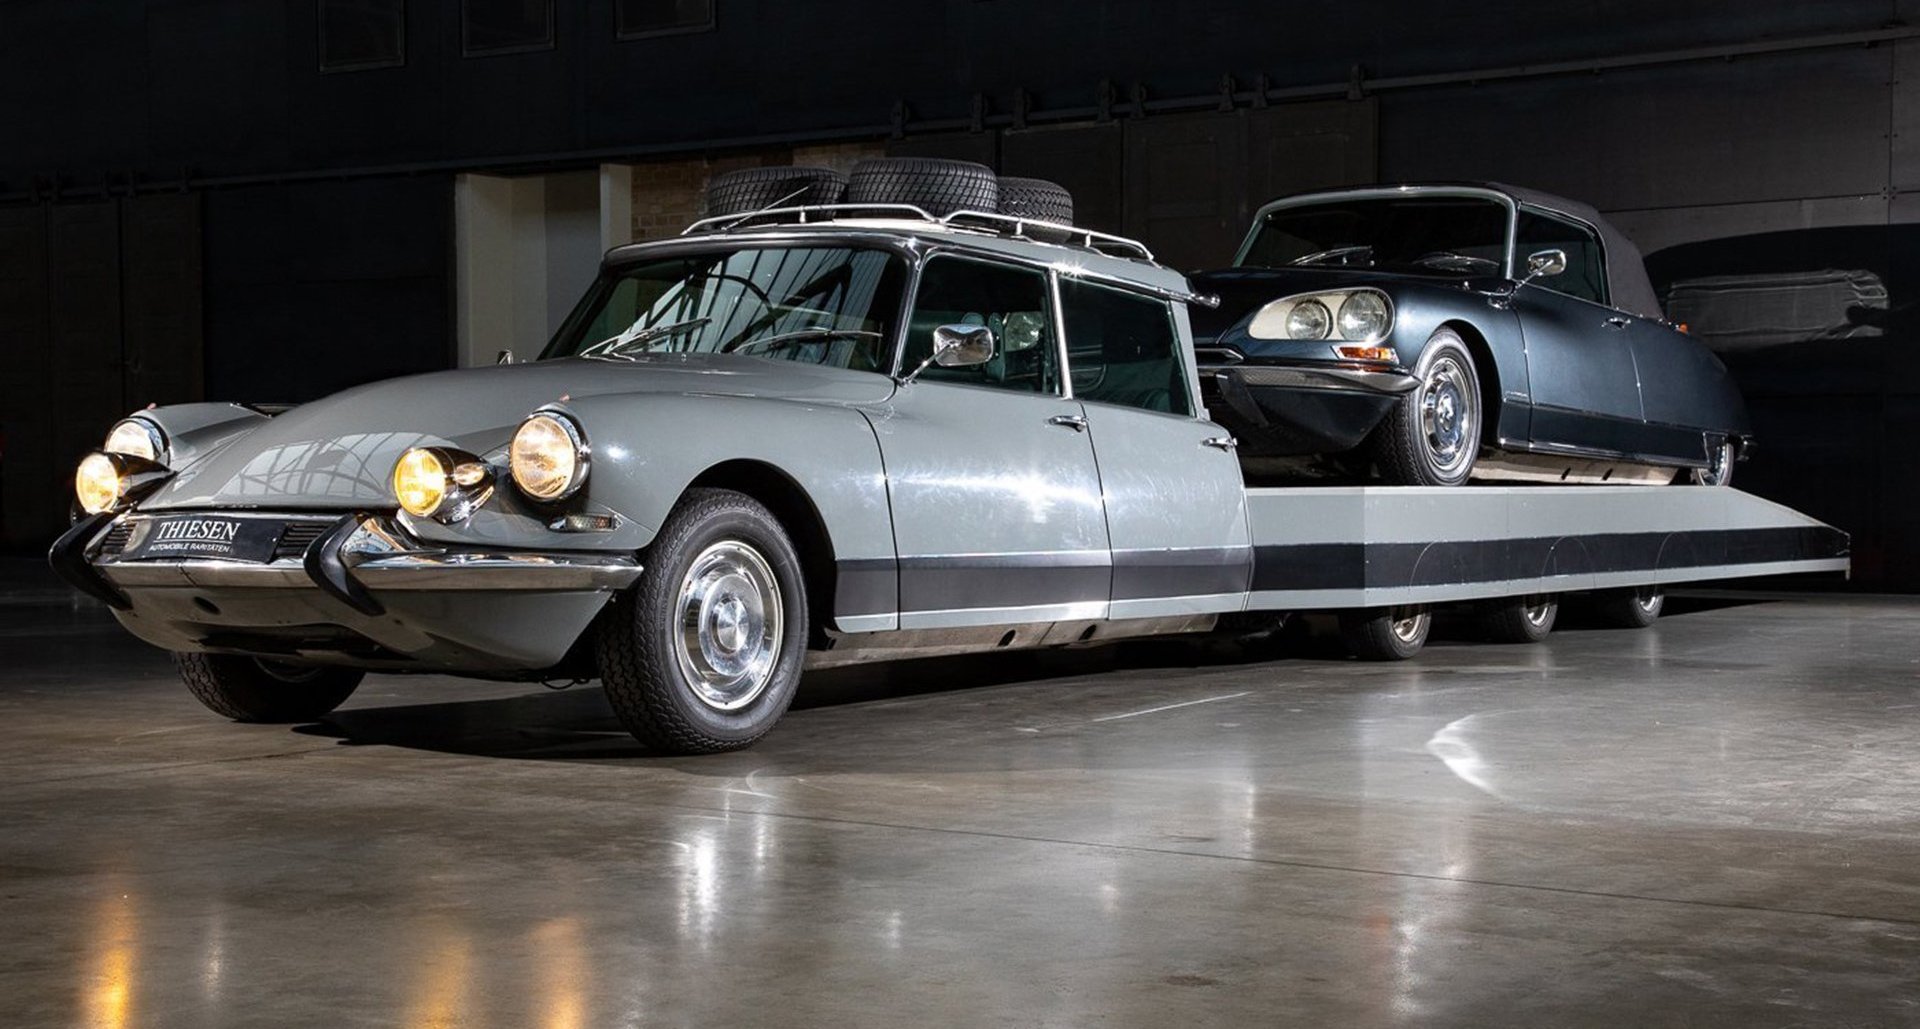 Tow your Citroën DS in style – with a Citroën DS